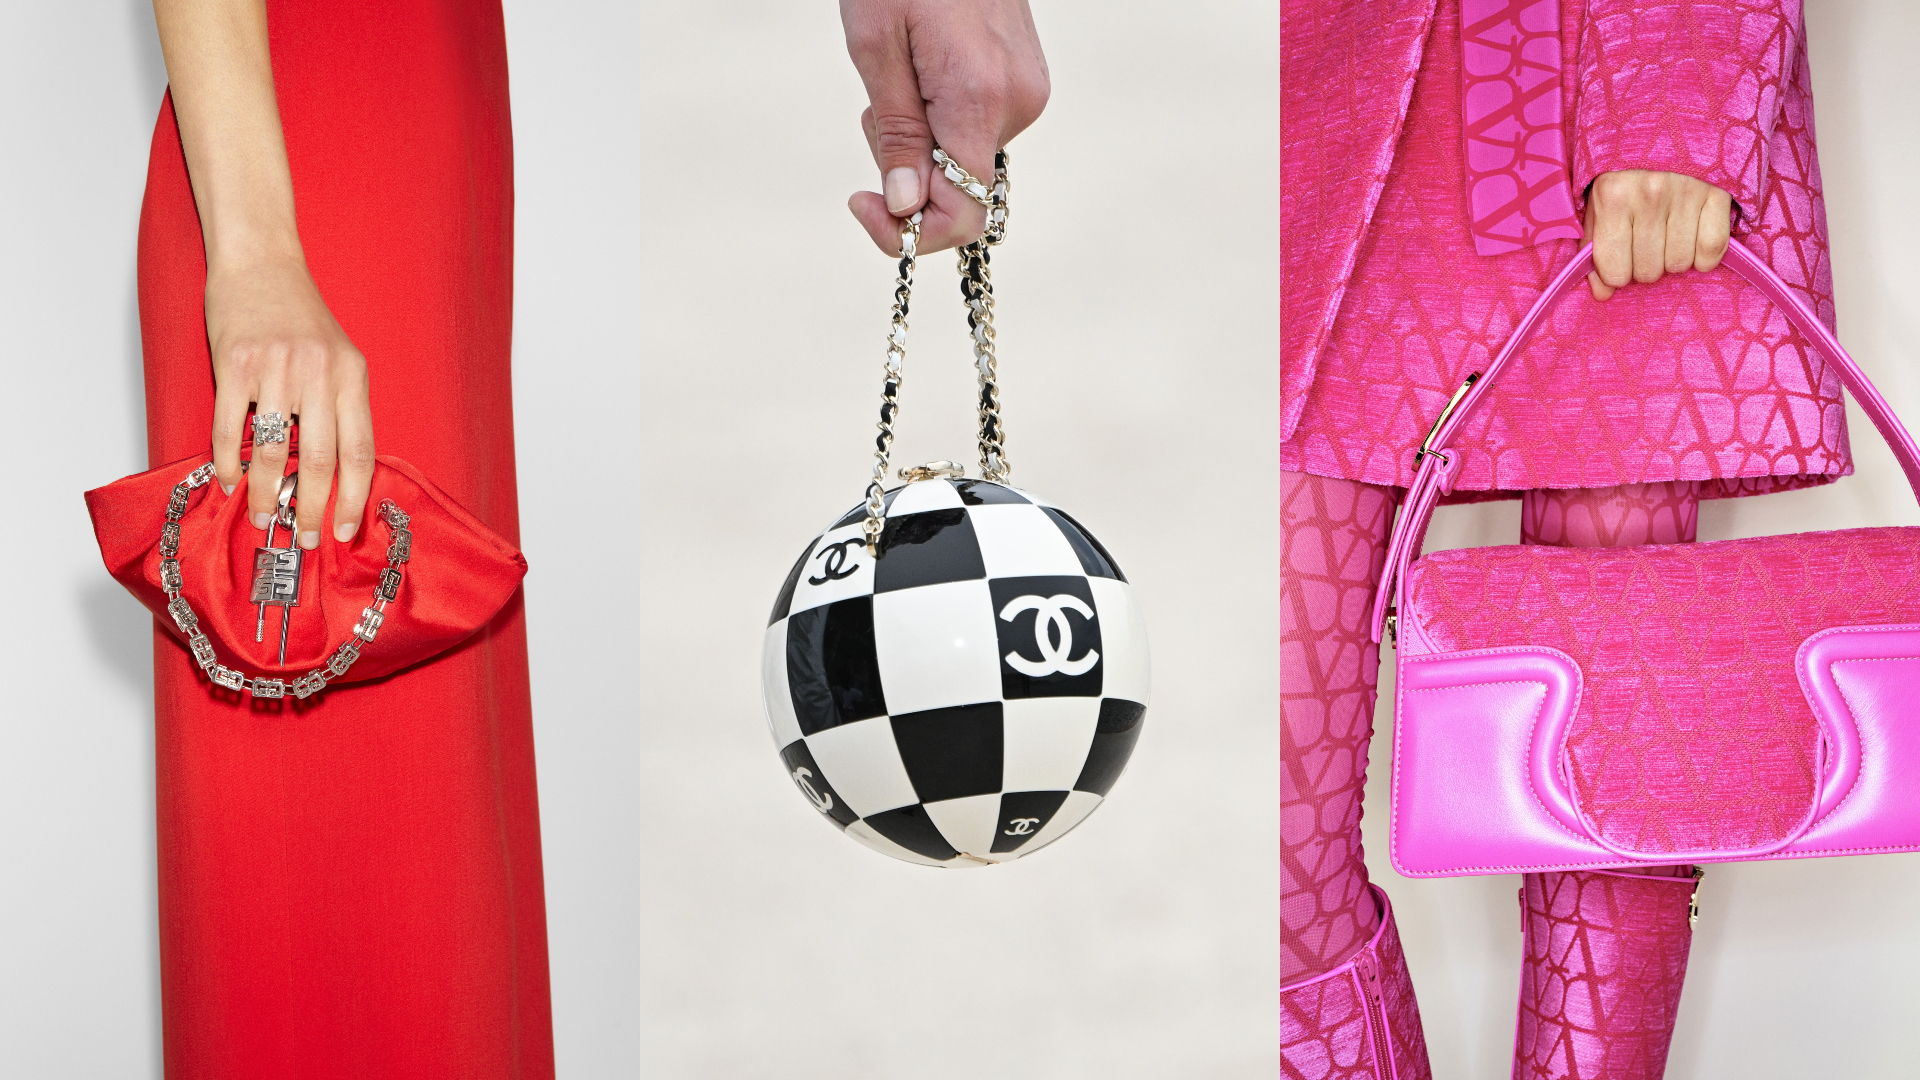 The Handbag Trends for Winter 2022-2023 Are Playful and